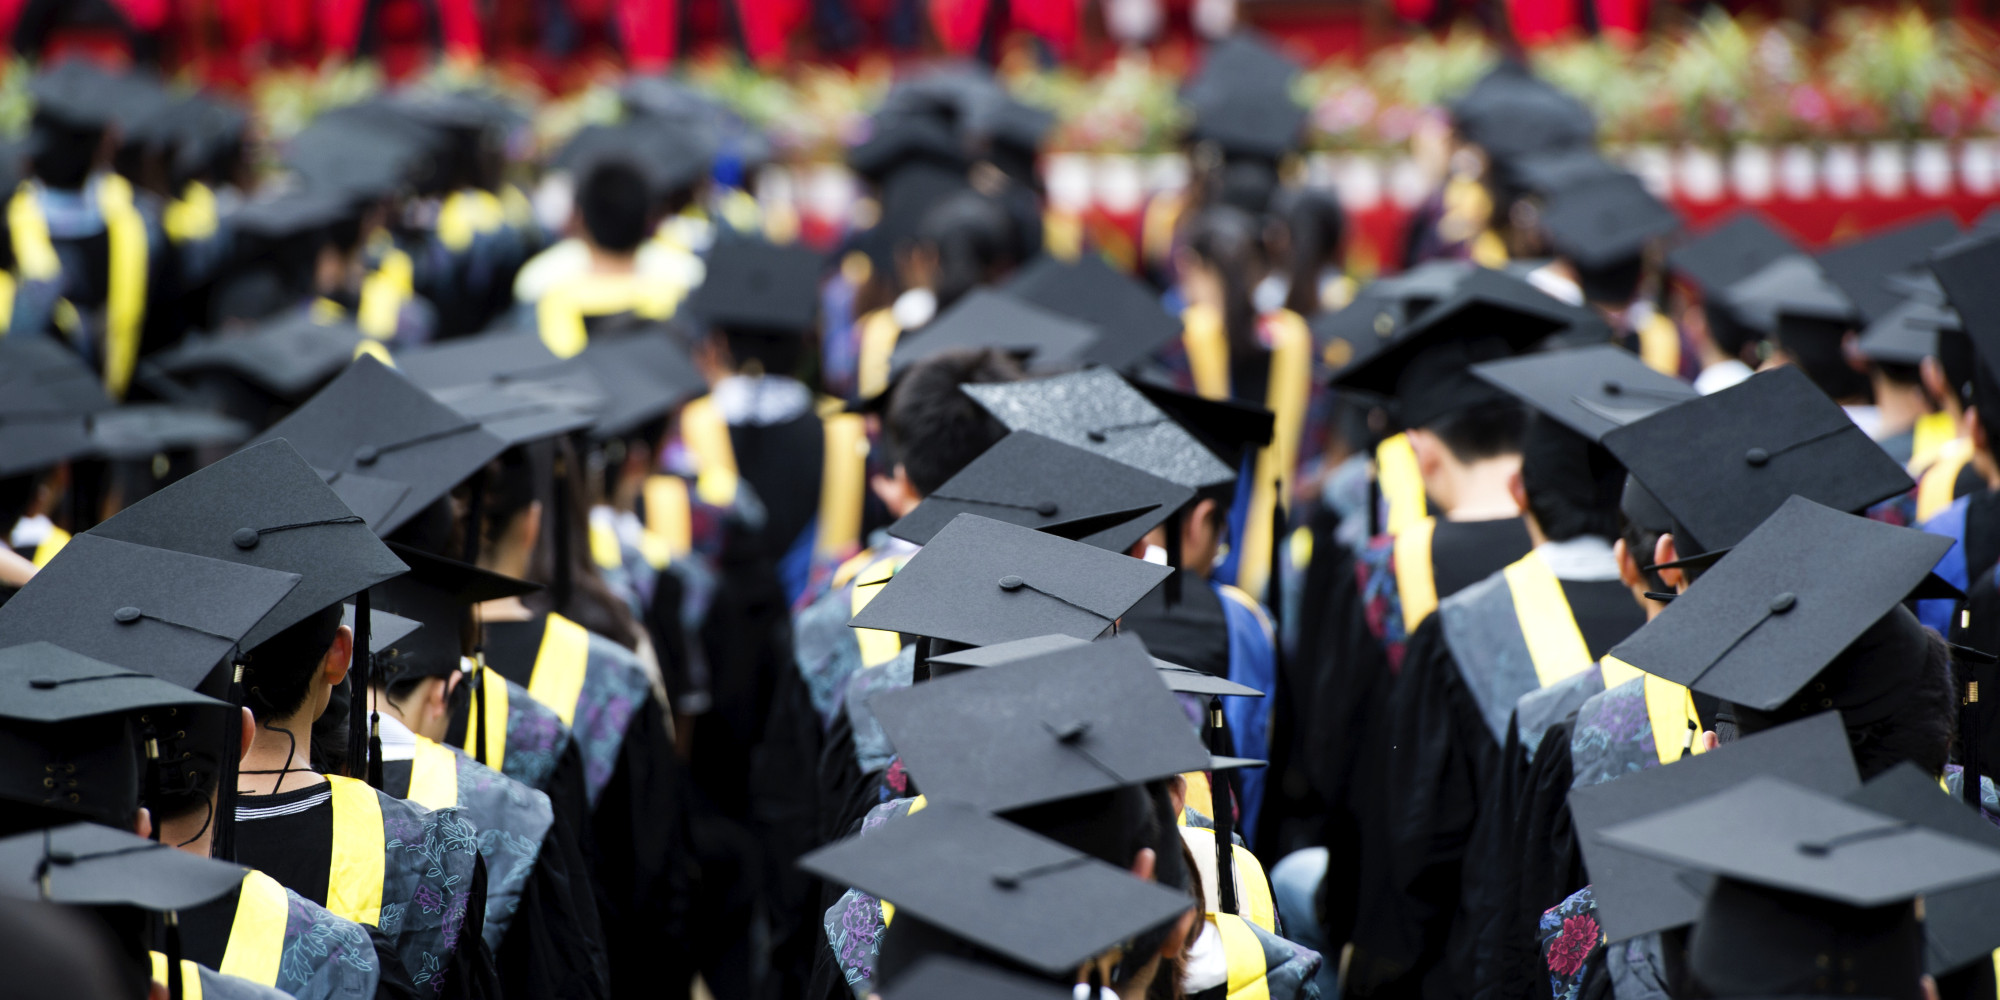 Notes from a New Graduate: What You Will and Won’t Miss about College